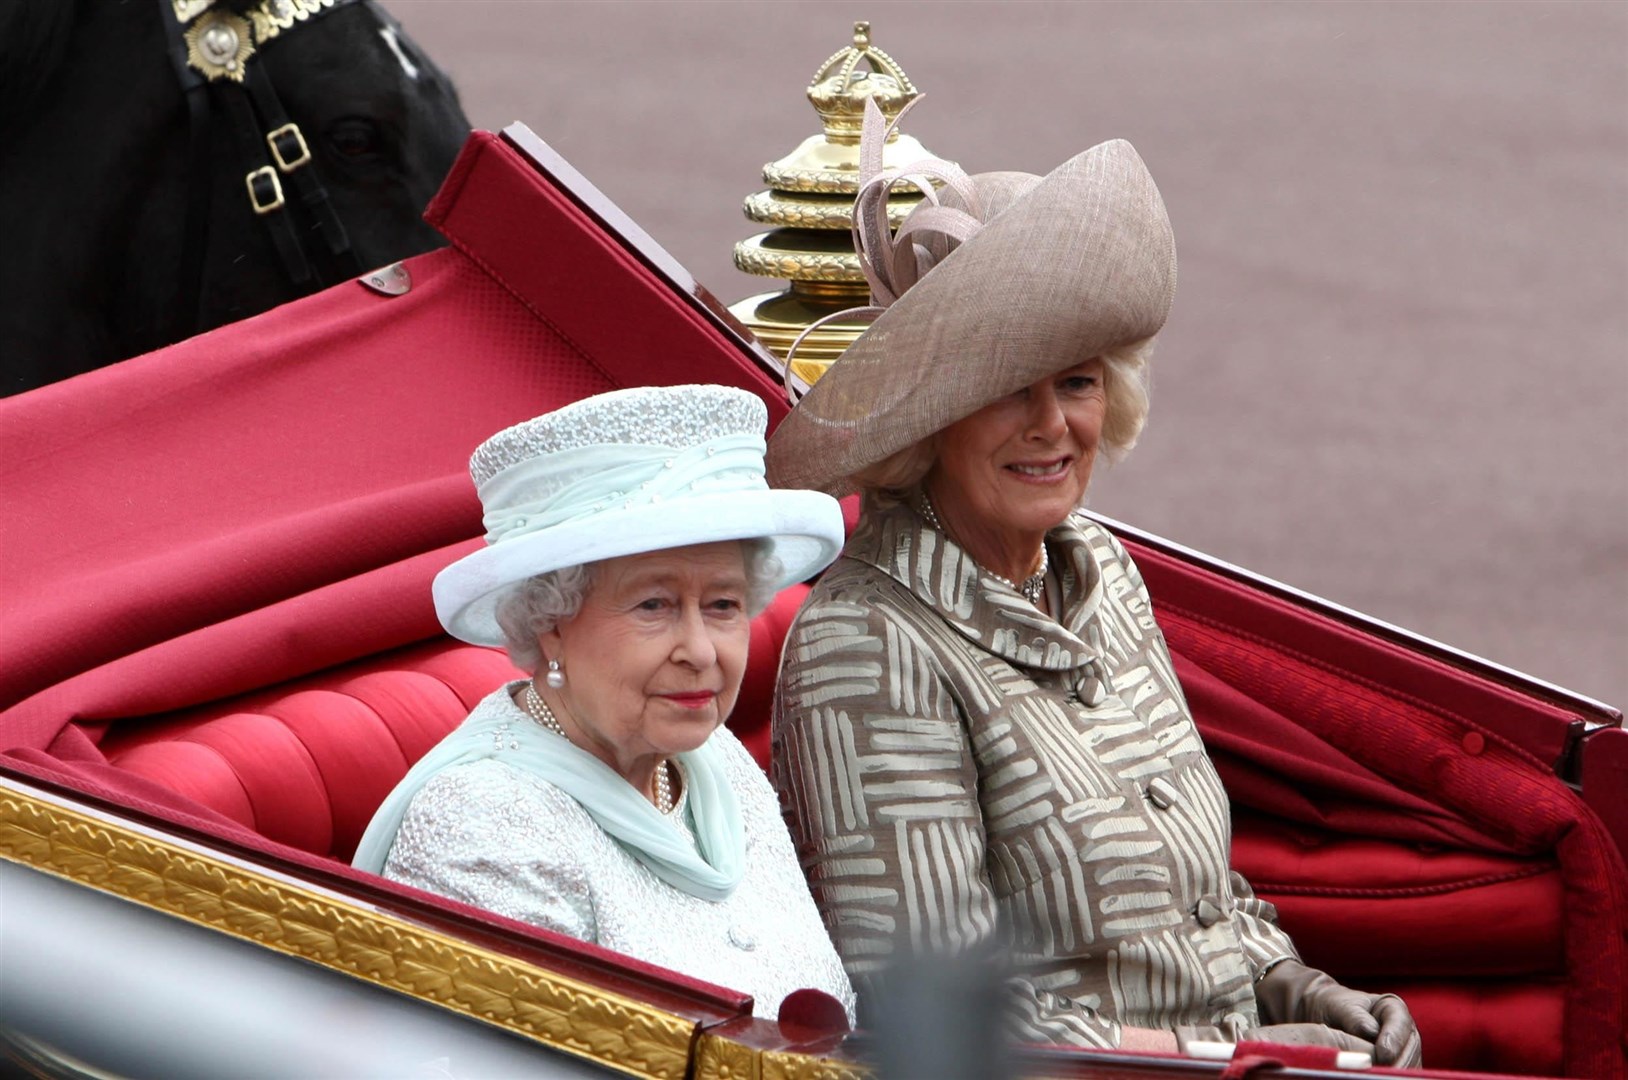 Queen Elizabeth II and the Duchess of Cornwall riding side by side in a carriage to Buckingham Palace during the Diamond Jubilee celebrations (David Jones/PA)